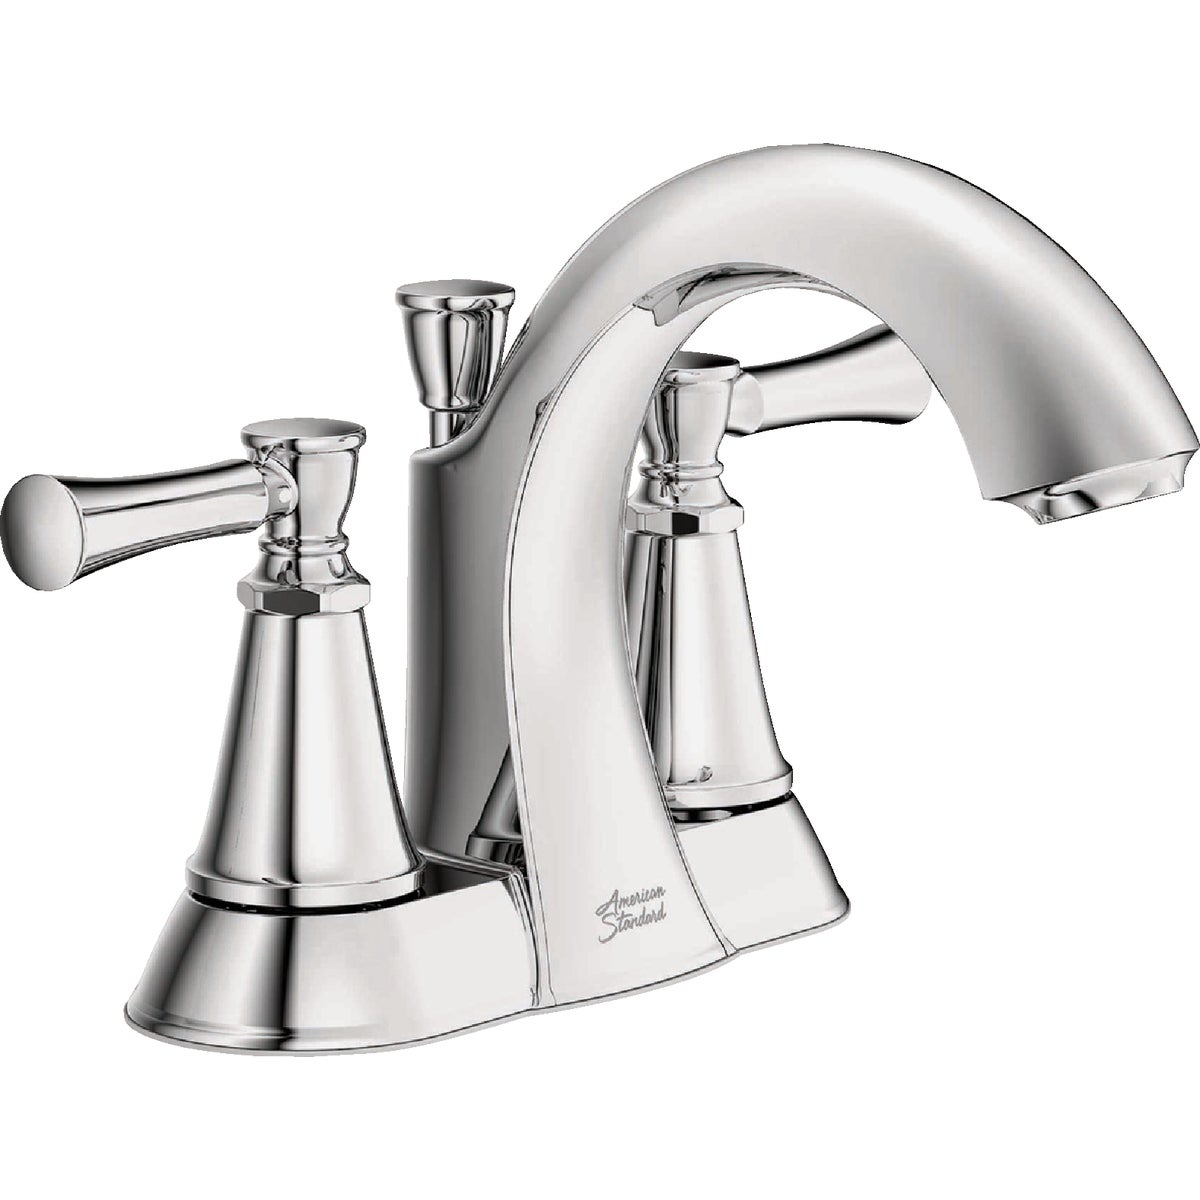 American Standard Chancellor Chrome 2-Handle Lever 4 In. Centerset Bathroom Faucet with Pop-Up